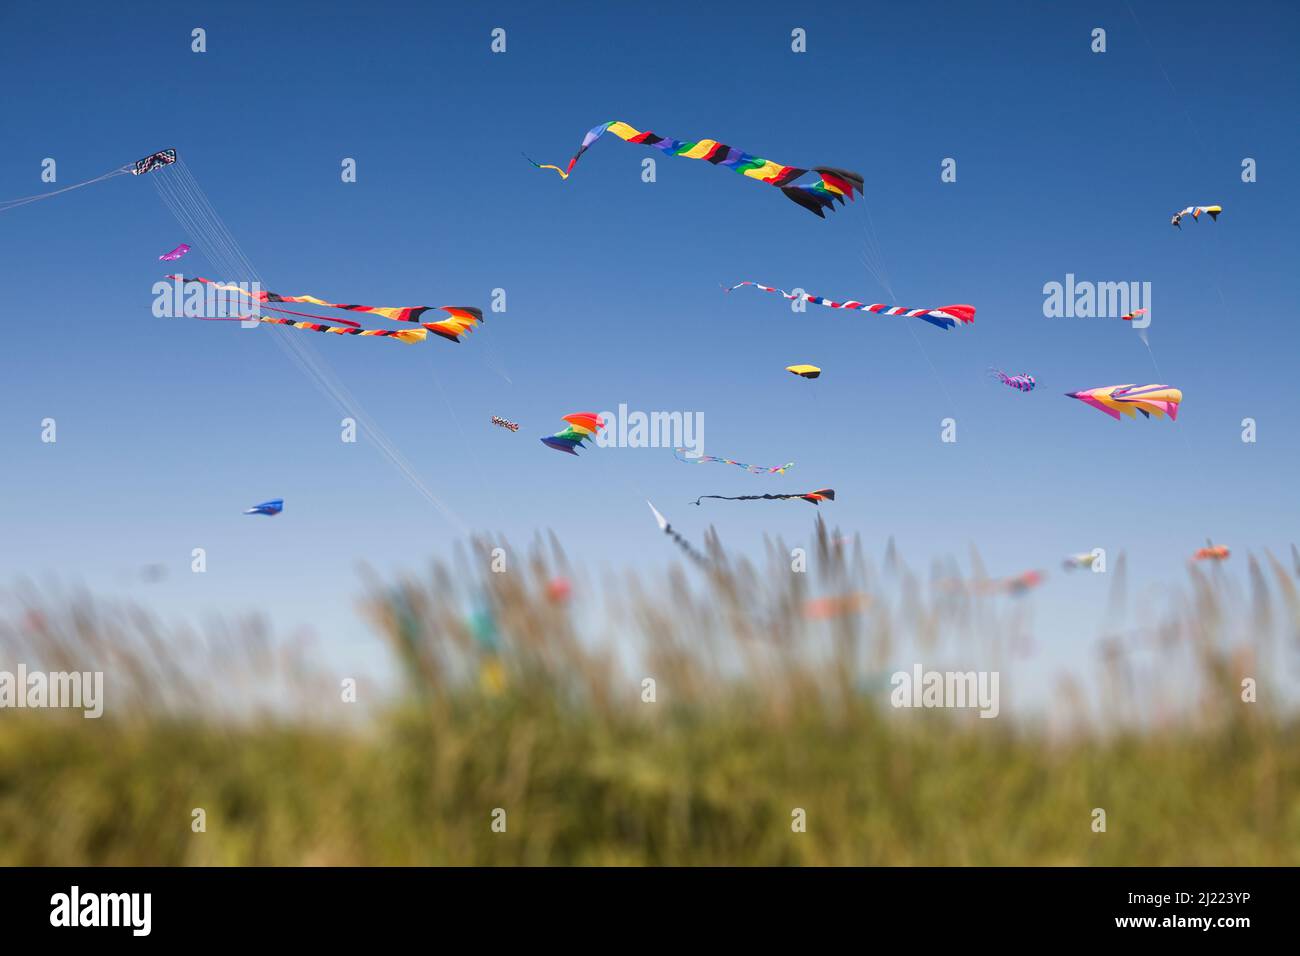 Colorful kites flying at a kite festival. Stock Photo